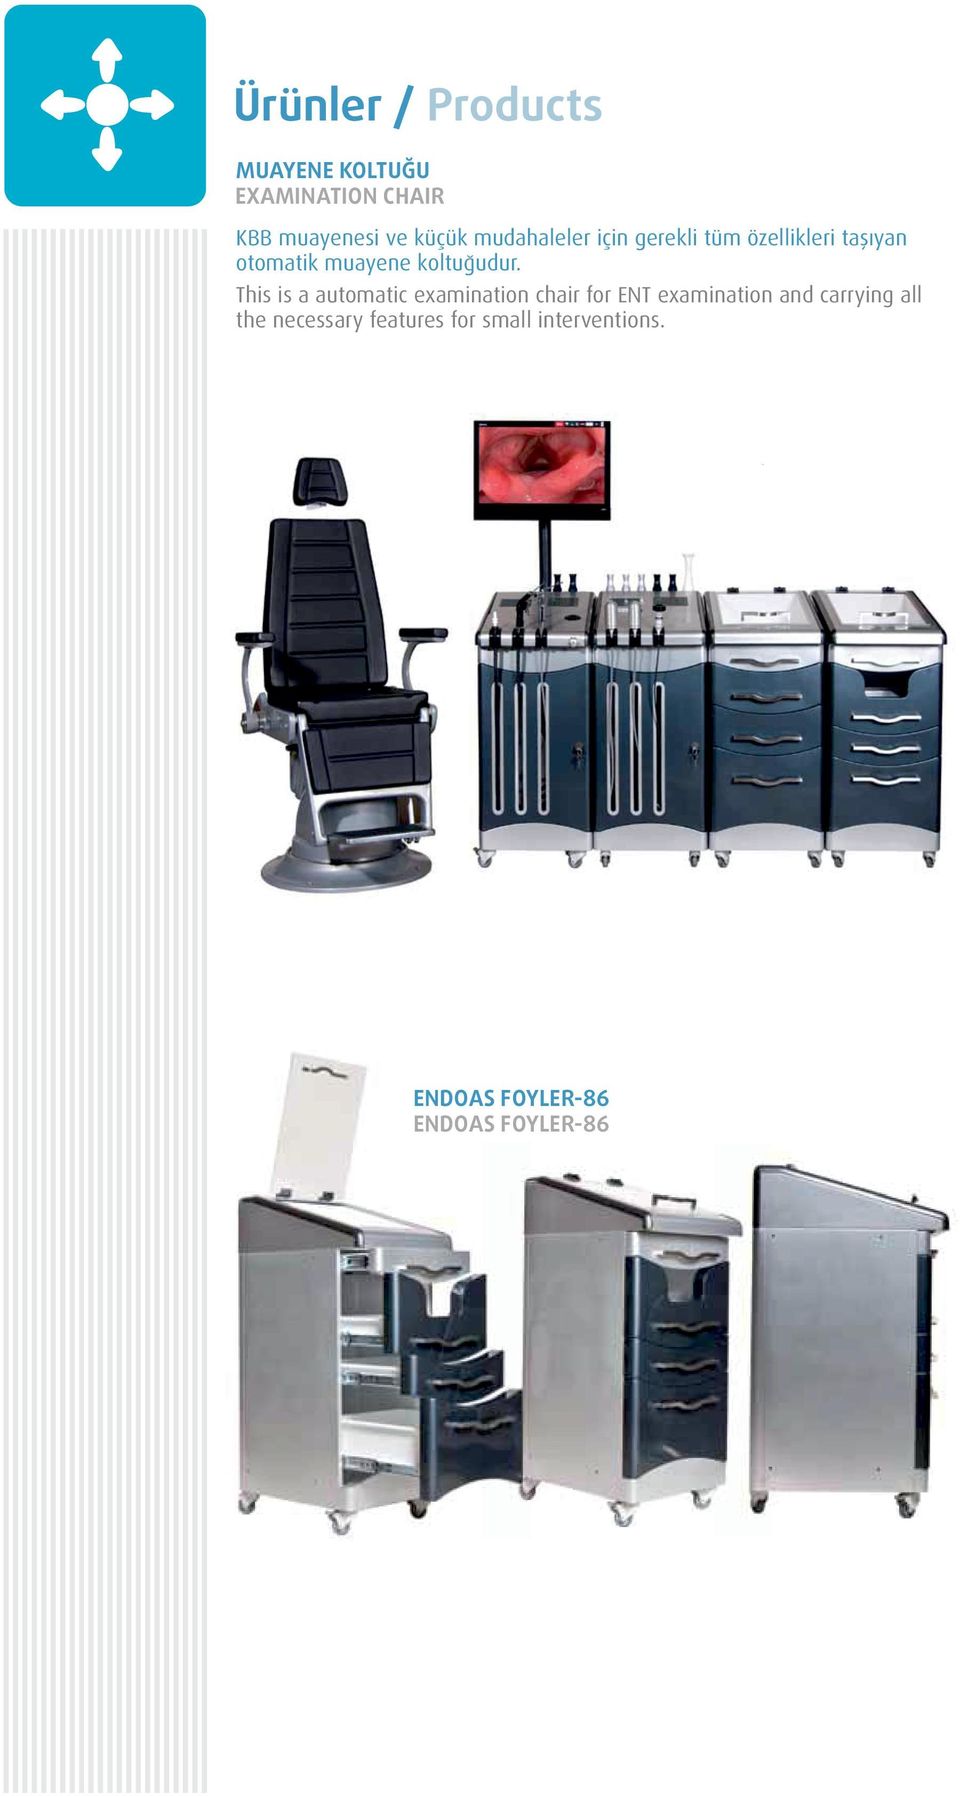 This is a automatic examination chair for ENT examination and carrying all